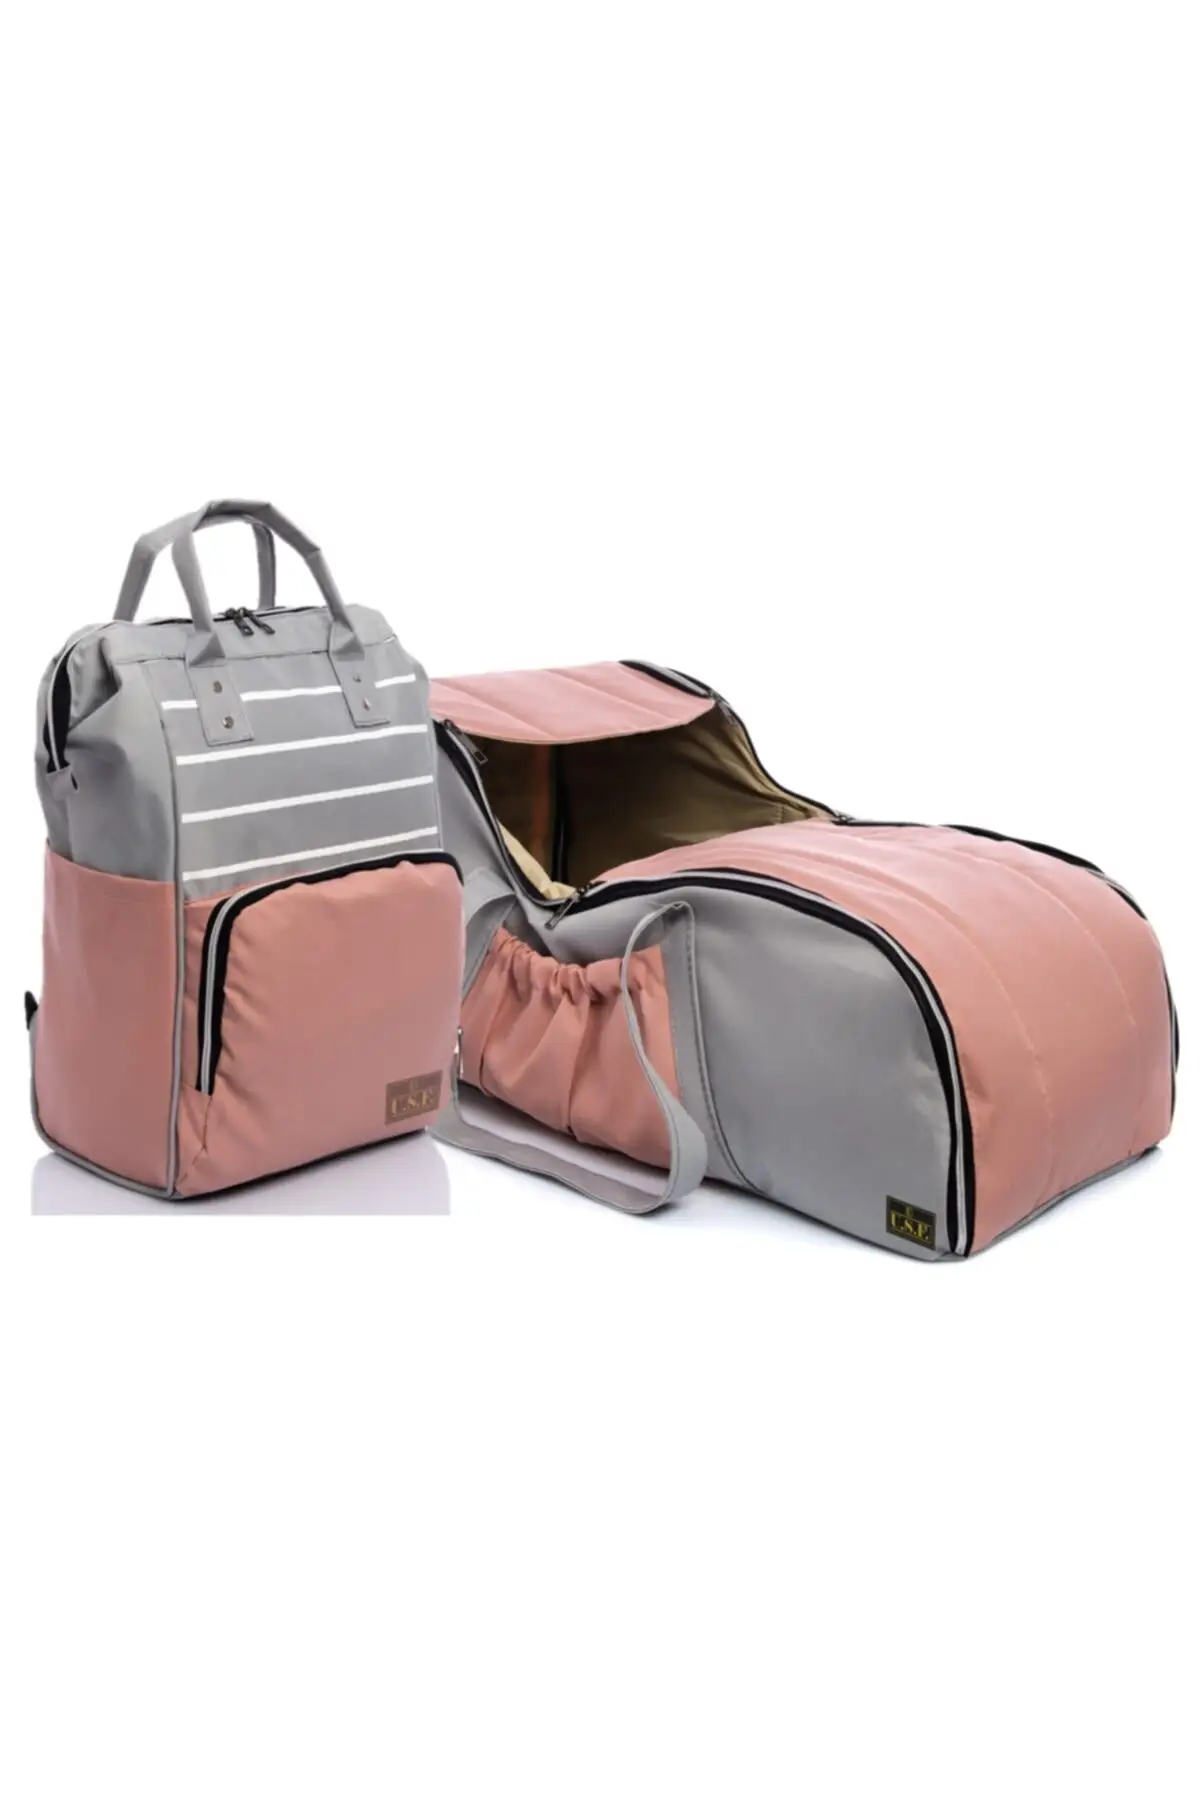 Gray Pink Mother Baby Care Bag + Portbebe Main Lap Stroller Dual Set Striped